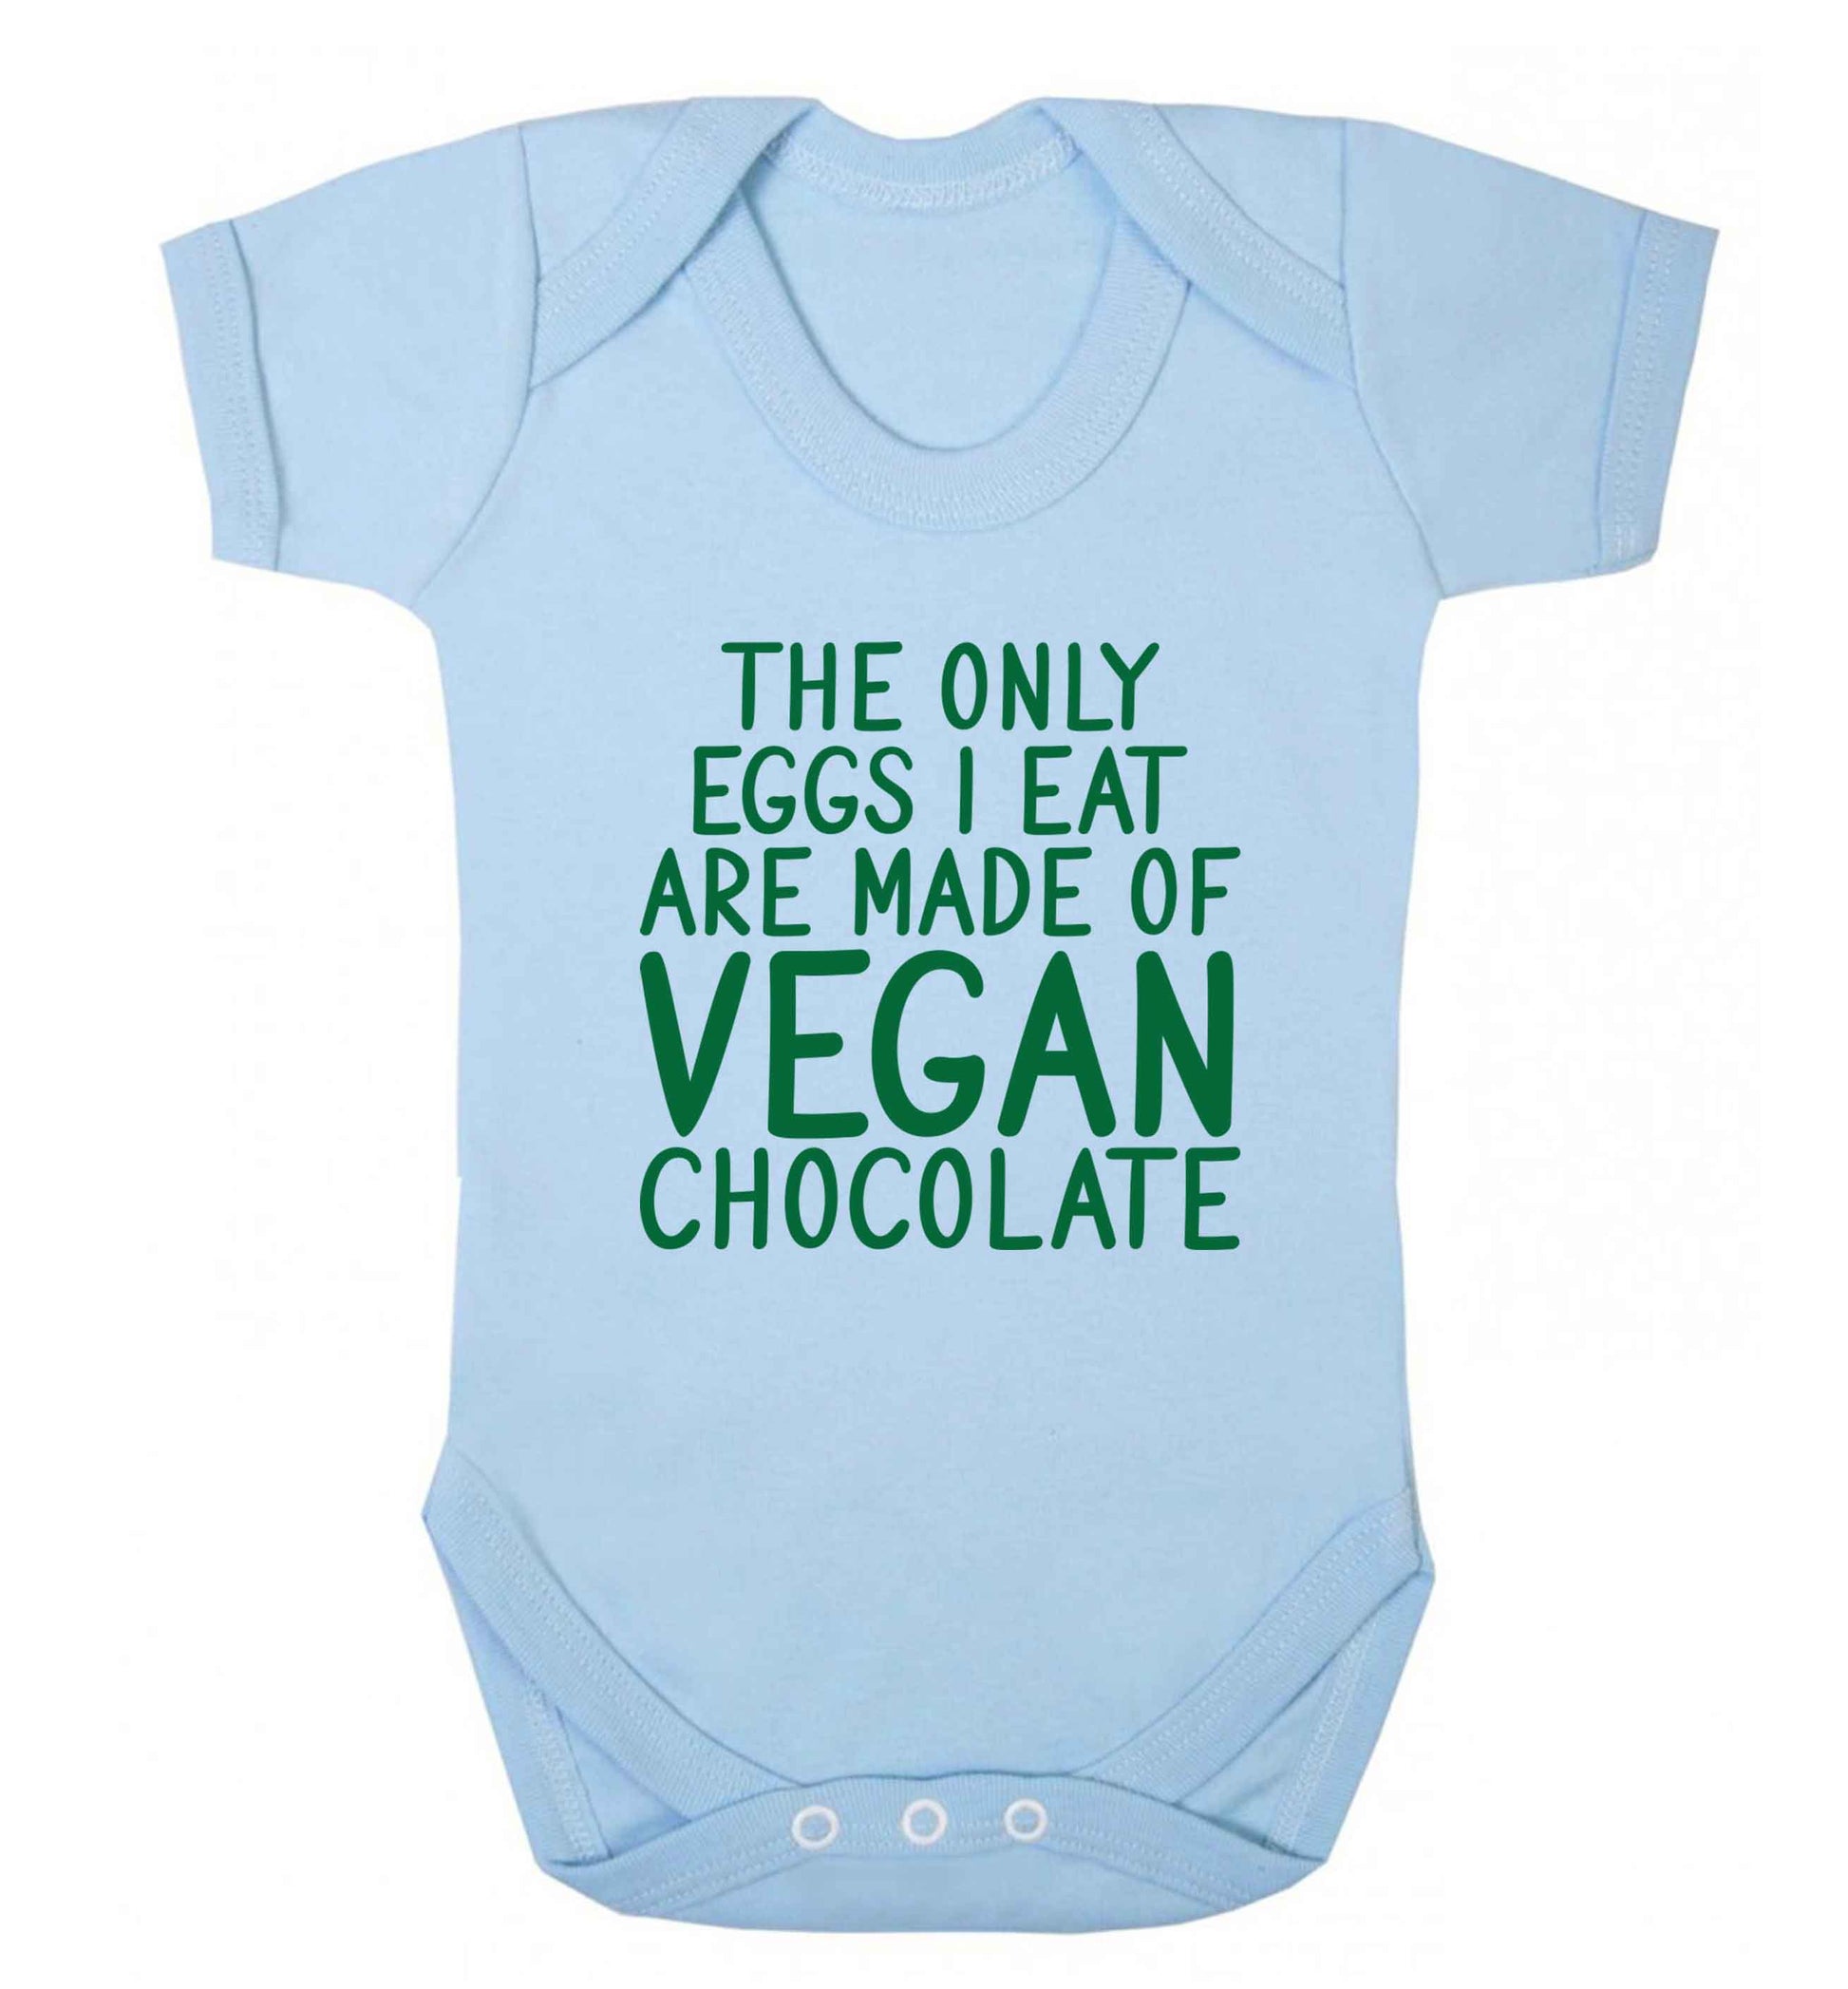 The only eggs I eat are made of vegan chocolate baby vest pale blue 18-24 months